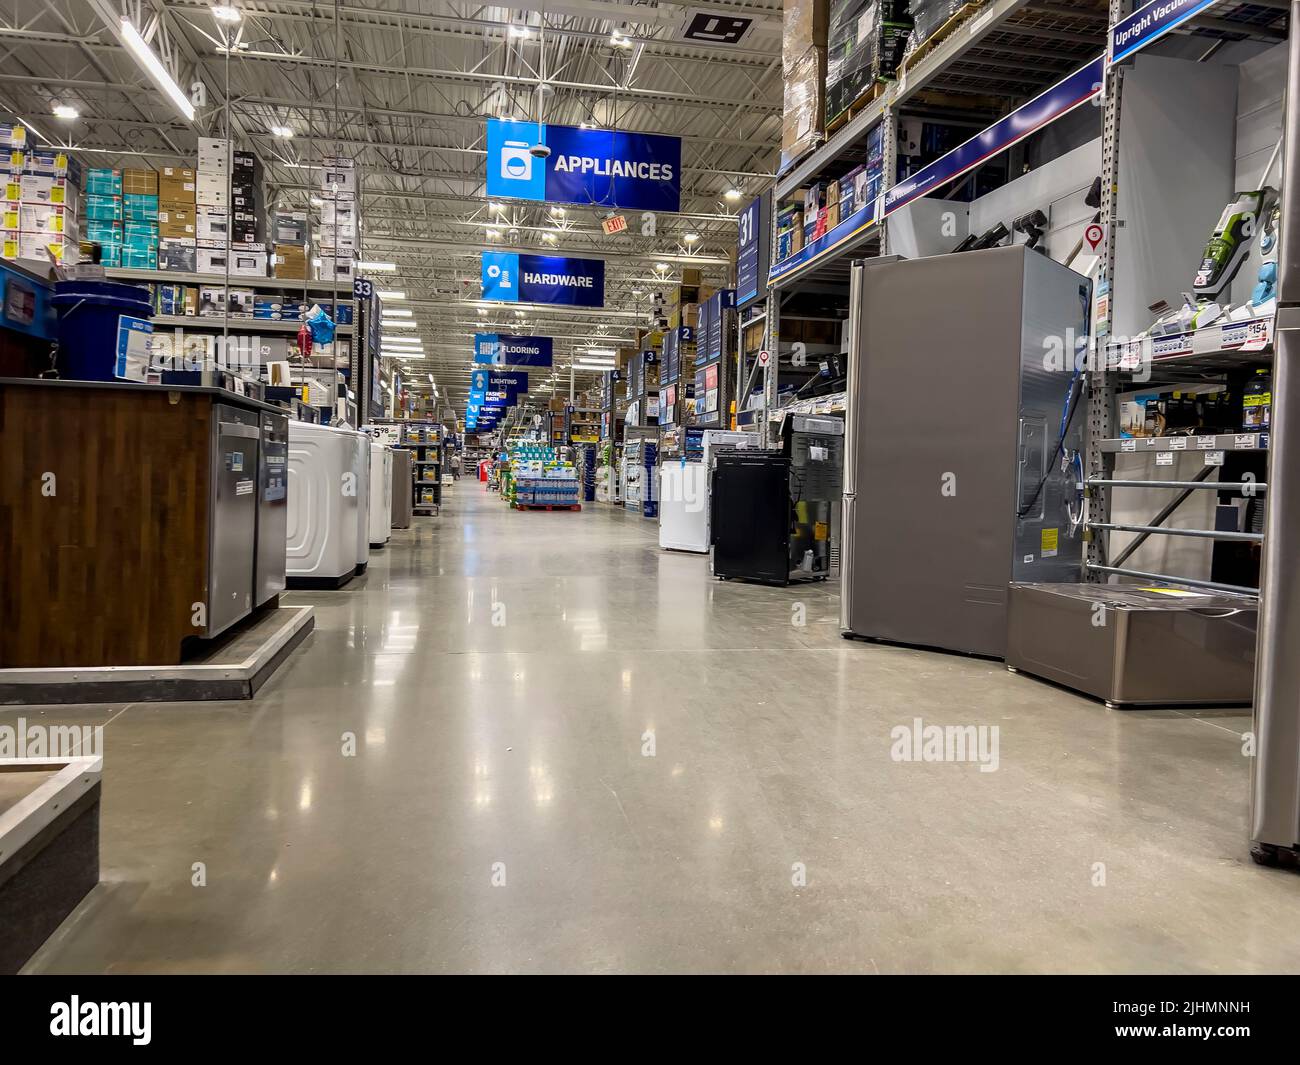 Mill Creek, WA USA - circa June 2022: Wide view of the appliance section inside a Lowe's home improvement store. Stock Photo